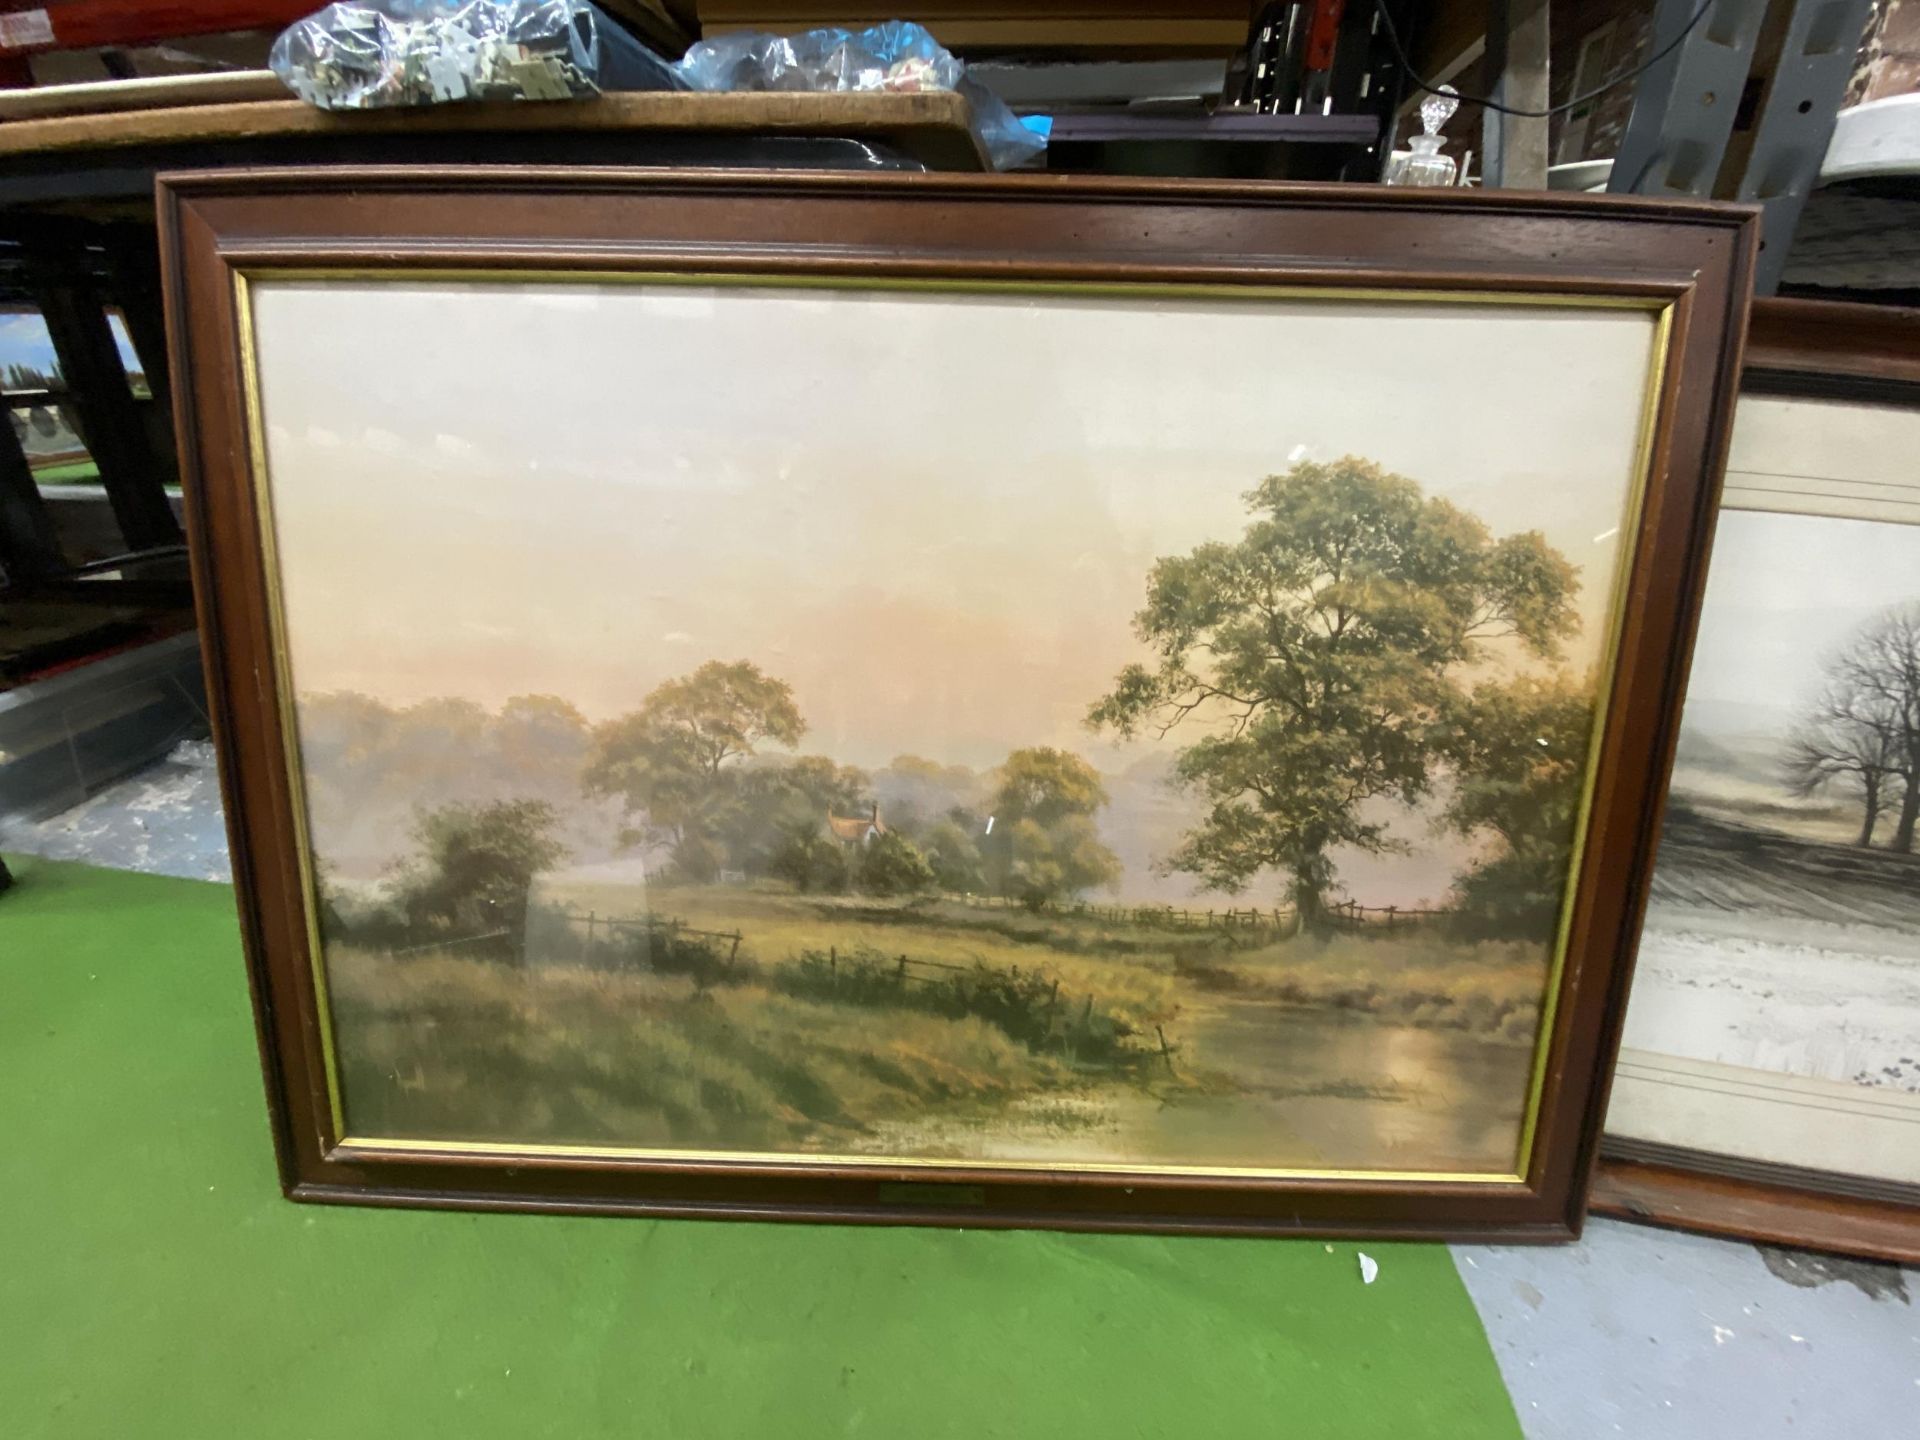 TWO VINTAGE FRAMED PRINTS OF COUNTYSIDE SCENES - Image 2 of 3